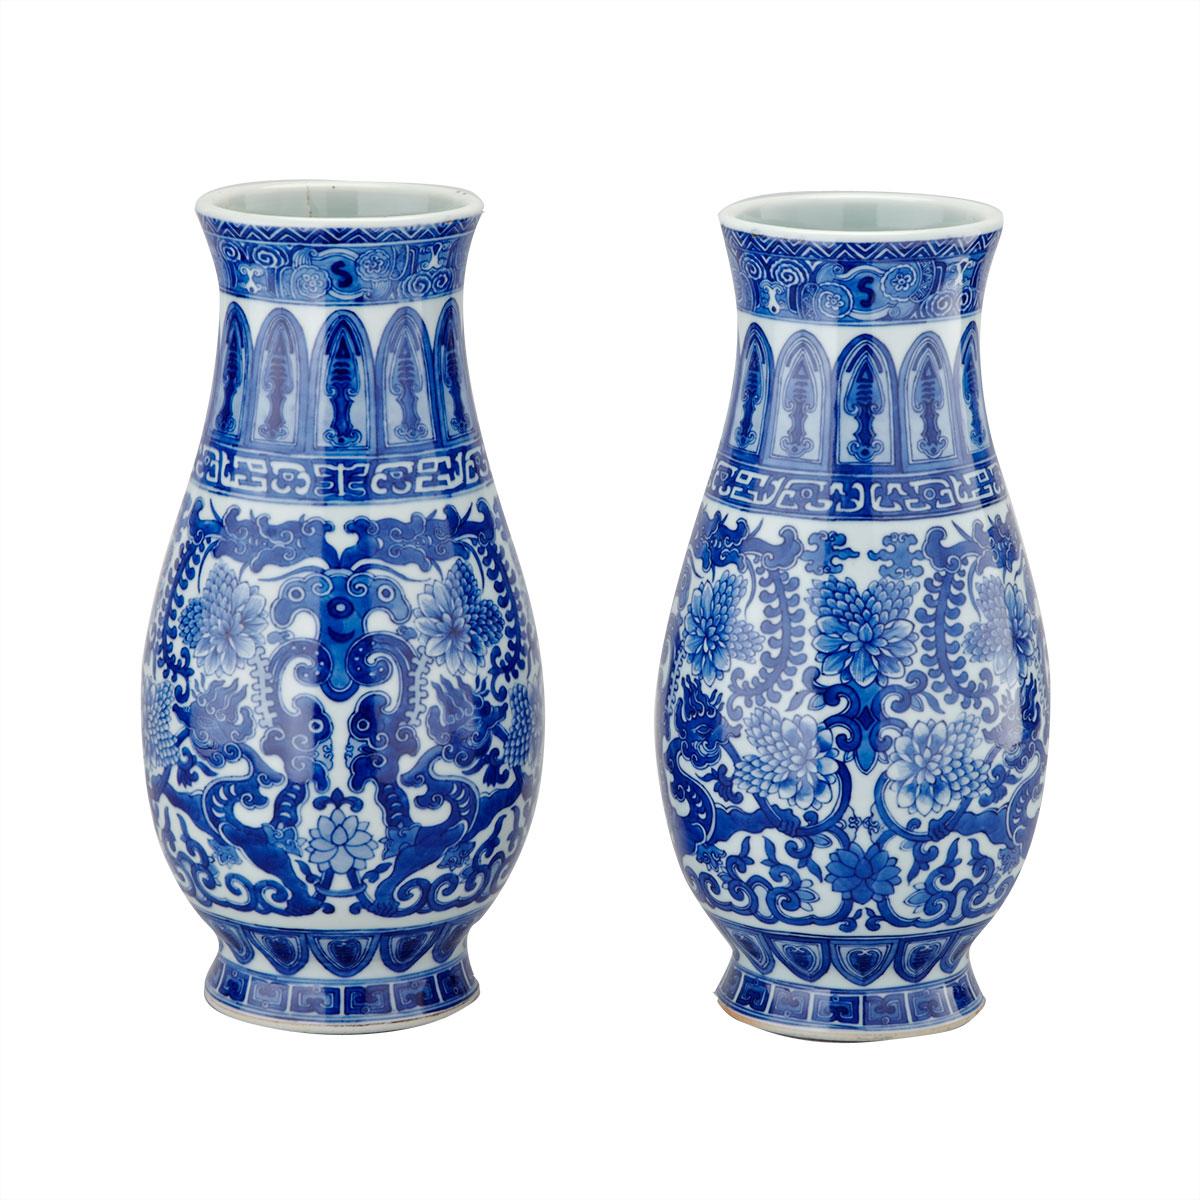 Pair of Blue and White Hu Vases, Qianlong Mark